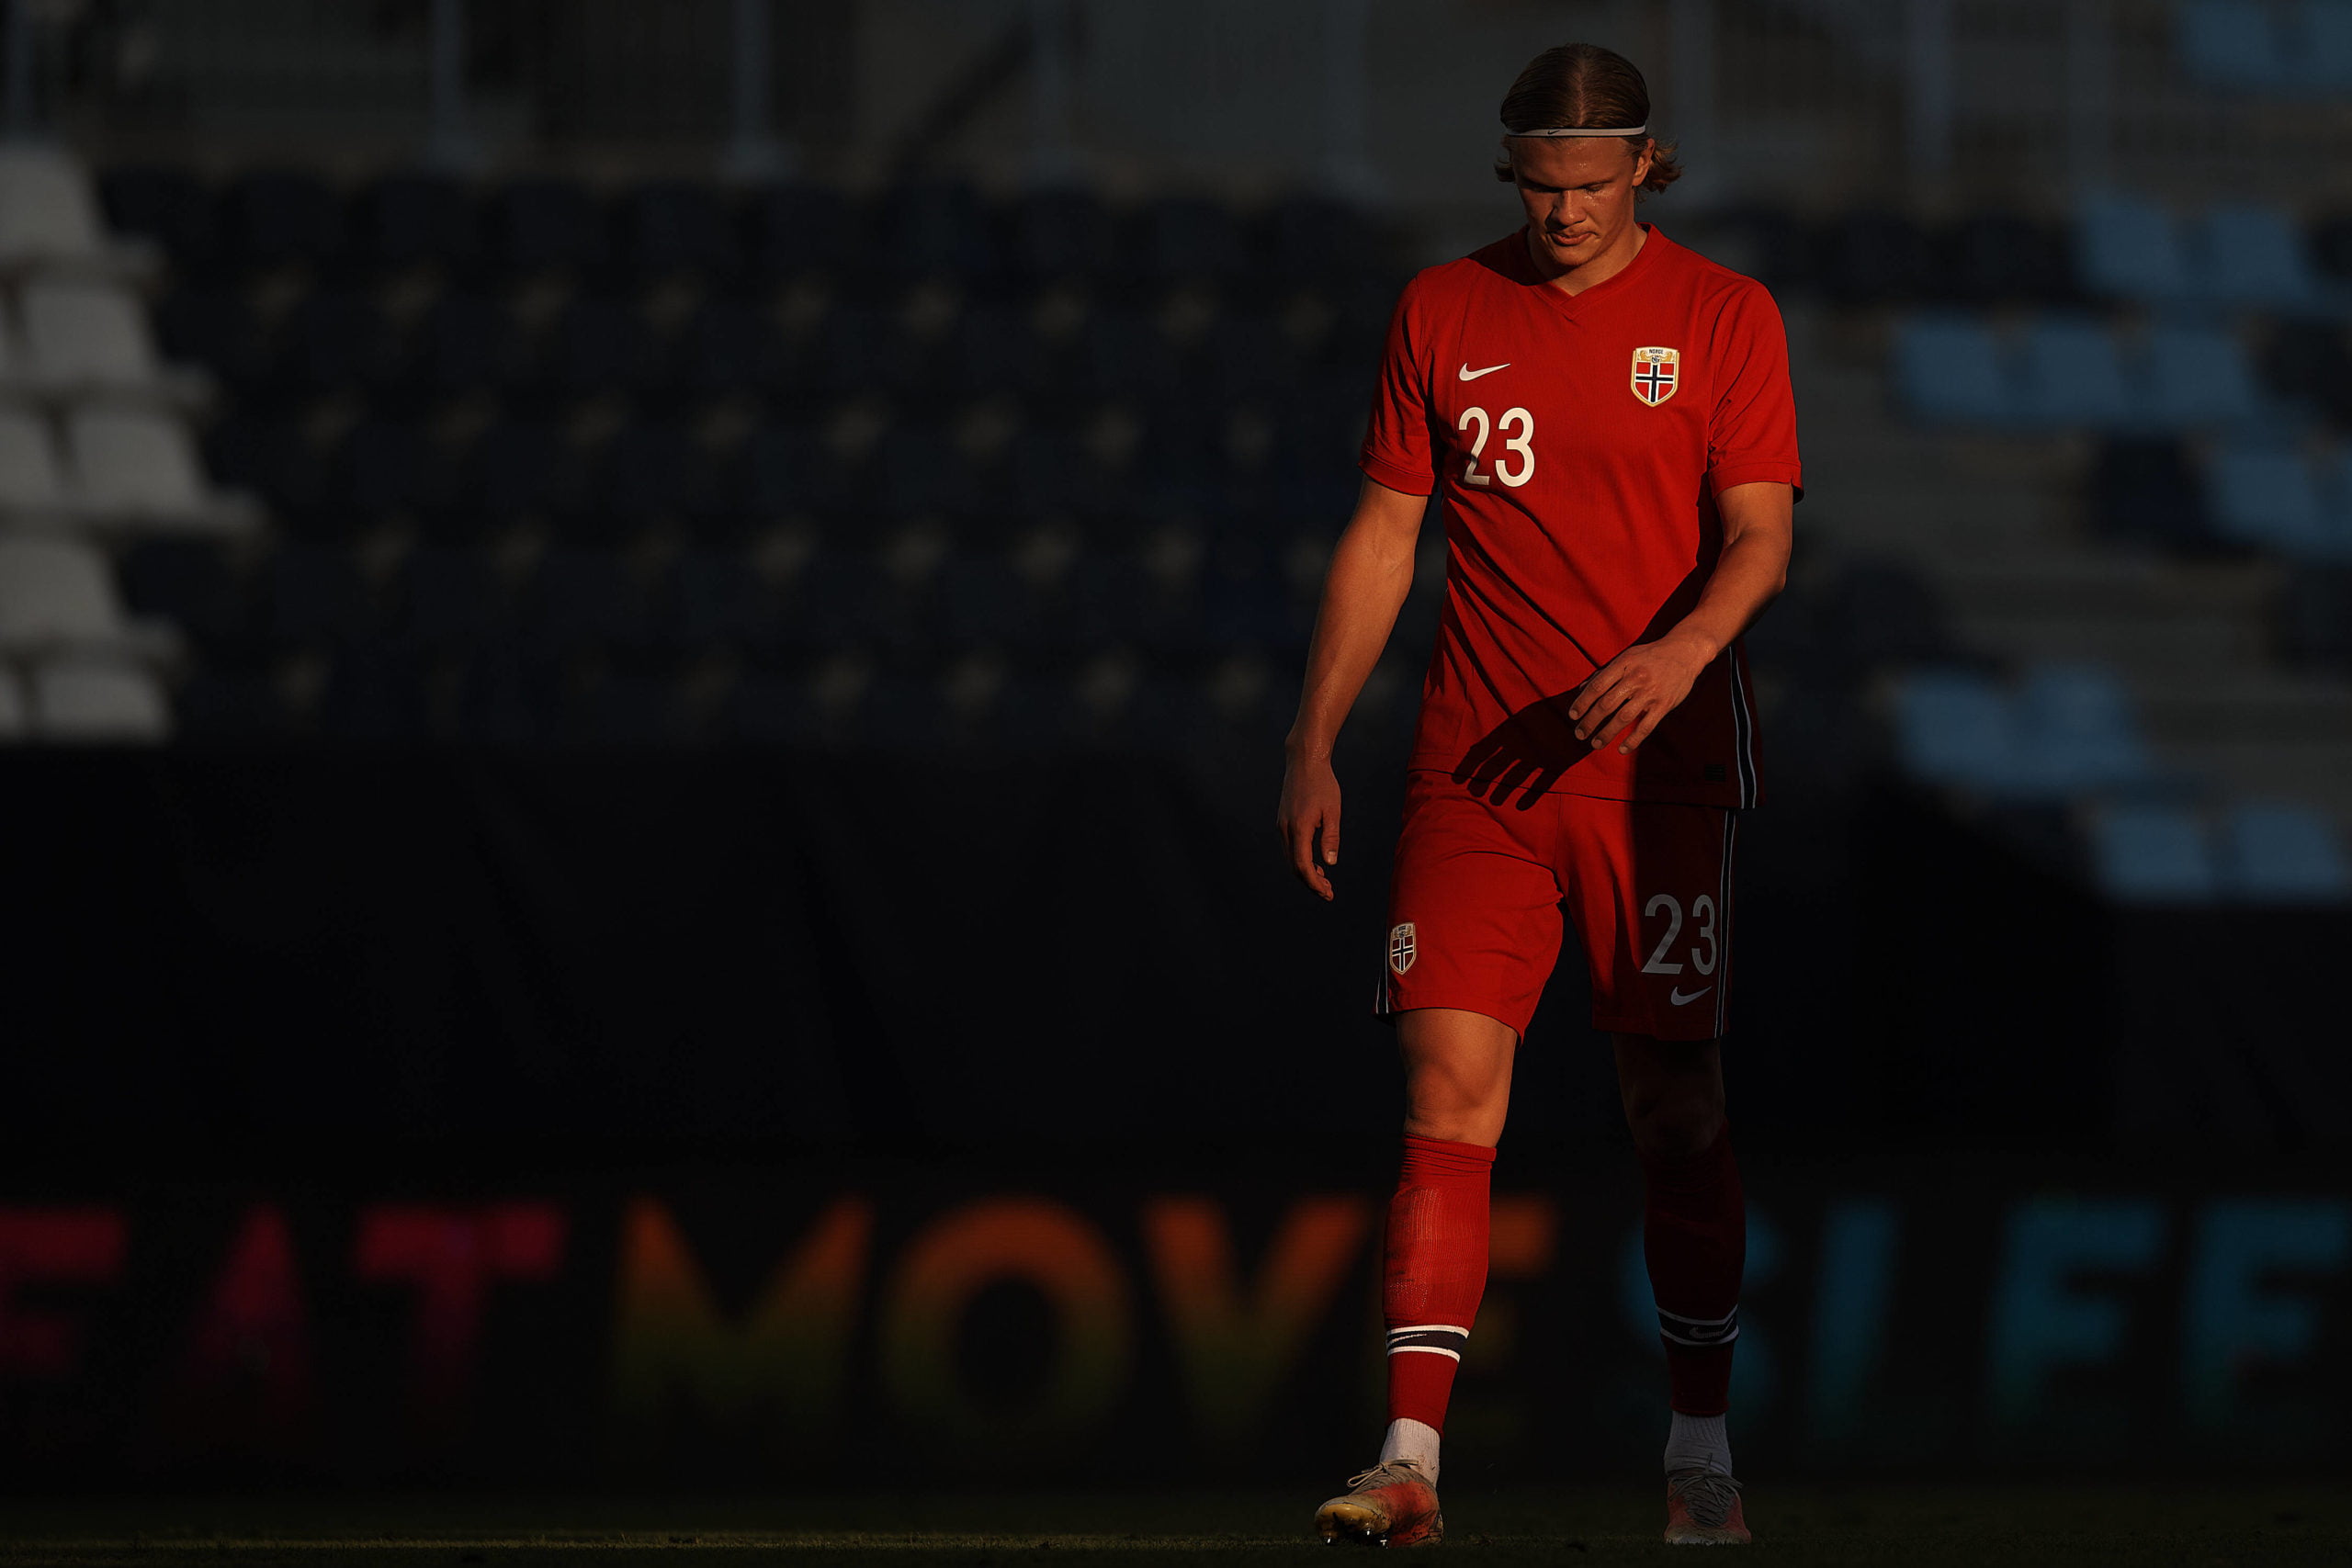 Liverpool tipped to recruit Erling Haaland next summer (Haaland is seen in the picture)